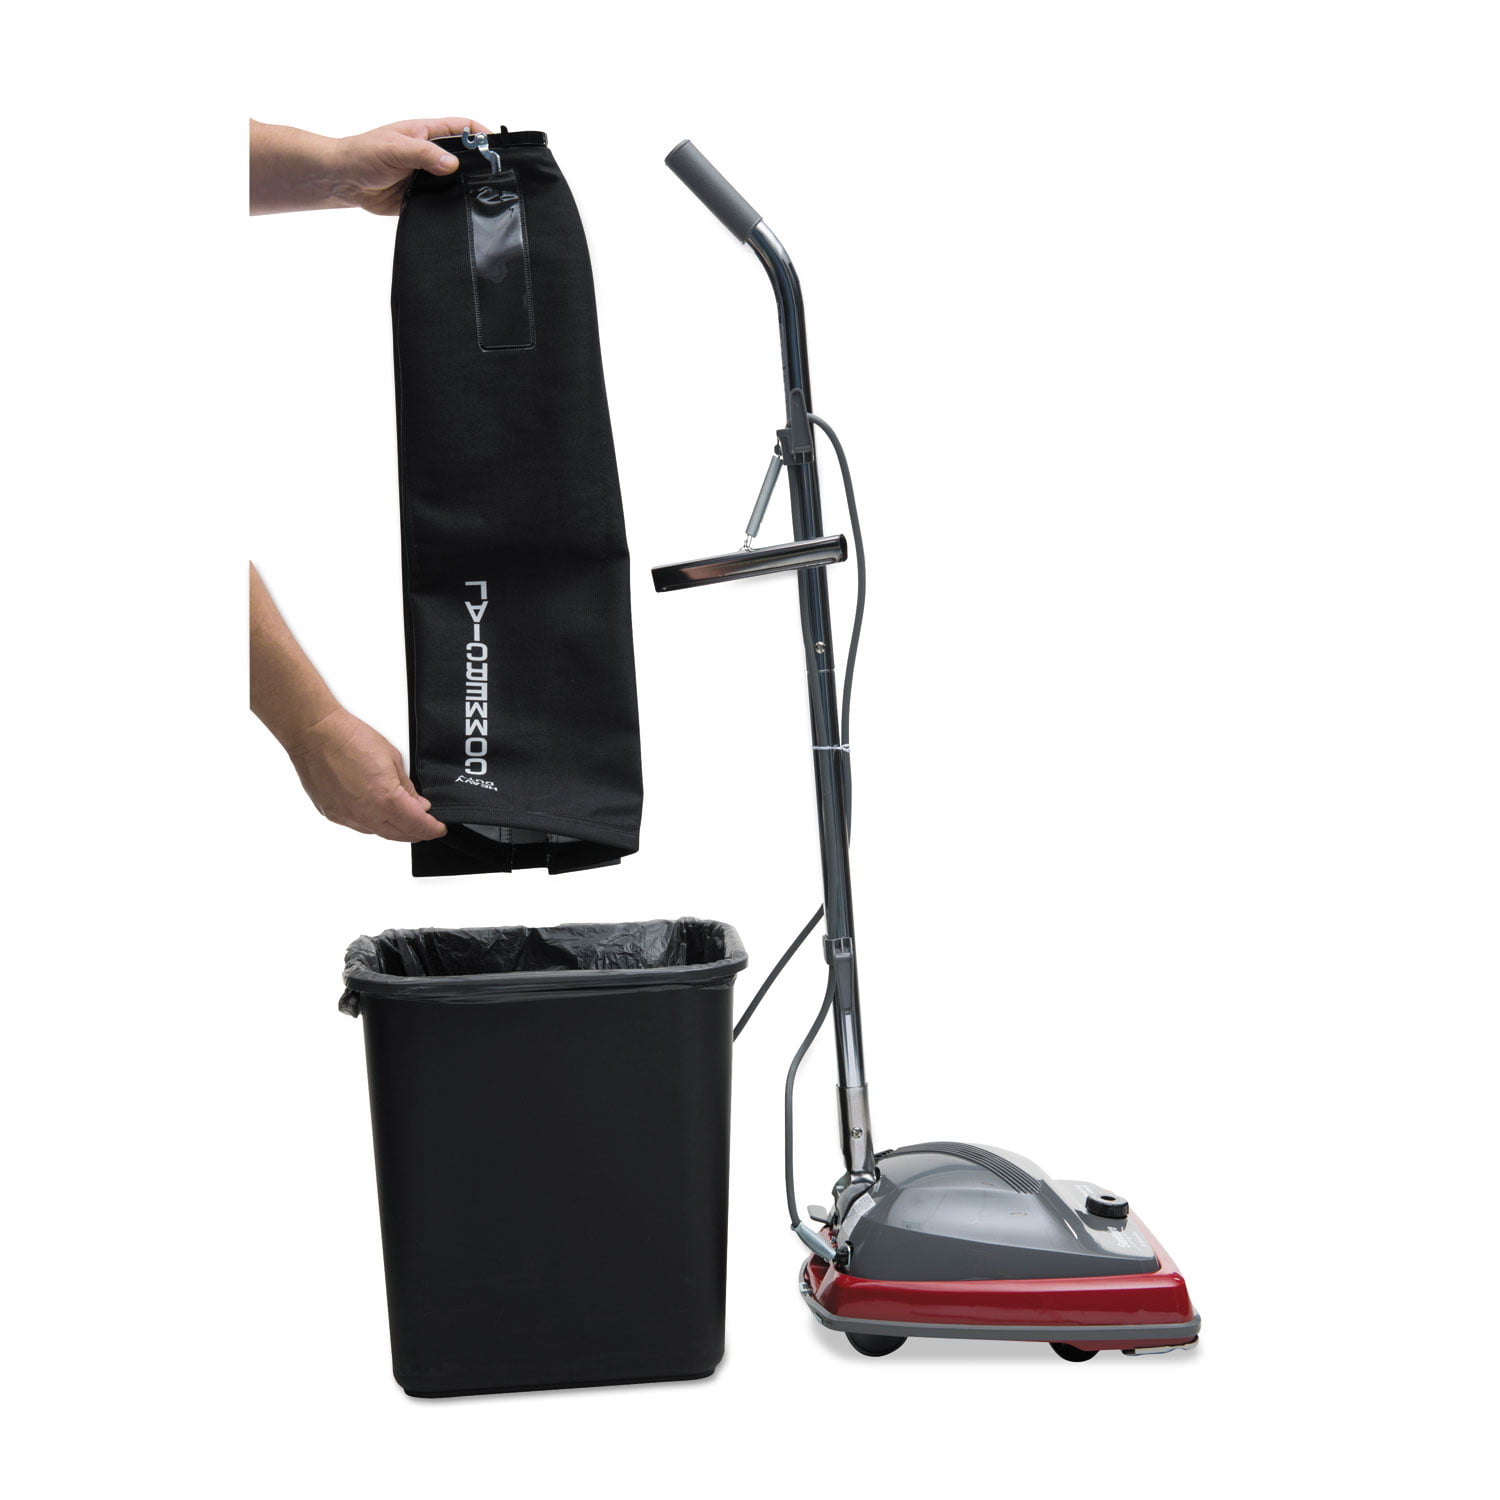 Sanitaire TRADITION Upright Vacuum, Shake Out Bag, SC679, SC679K